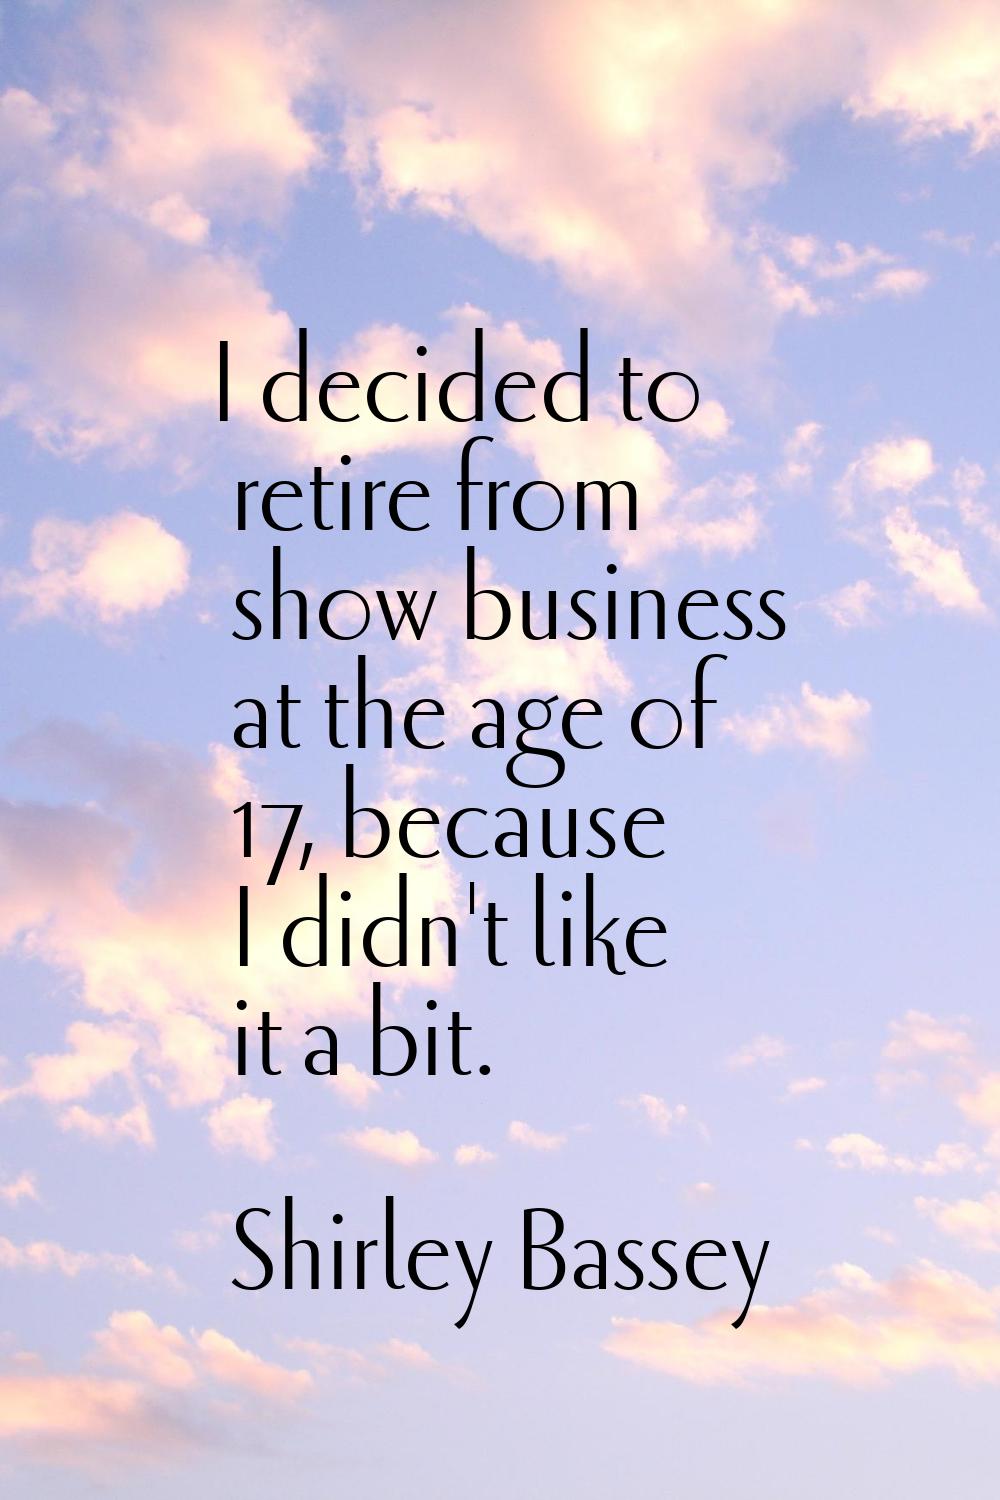 I decided to retire from show business at the age of 17, because I didn't like it a bit.